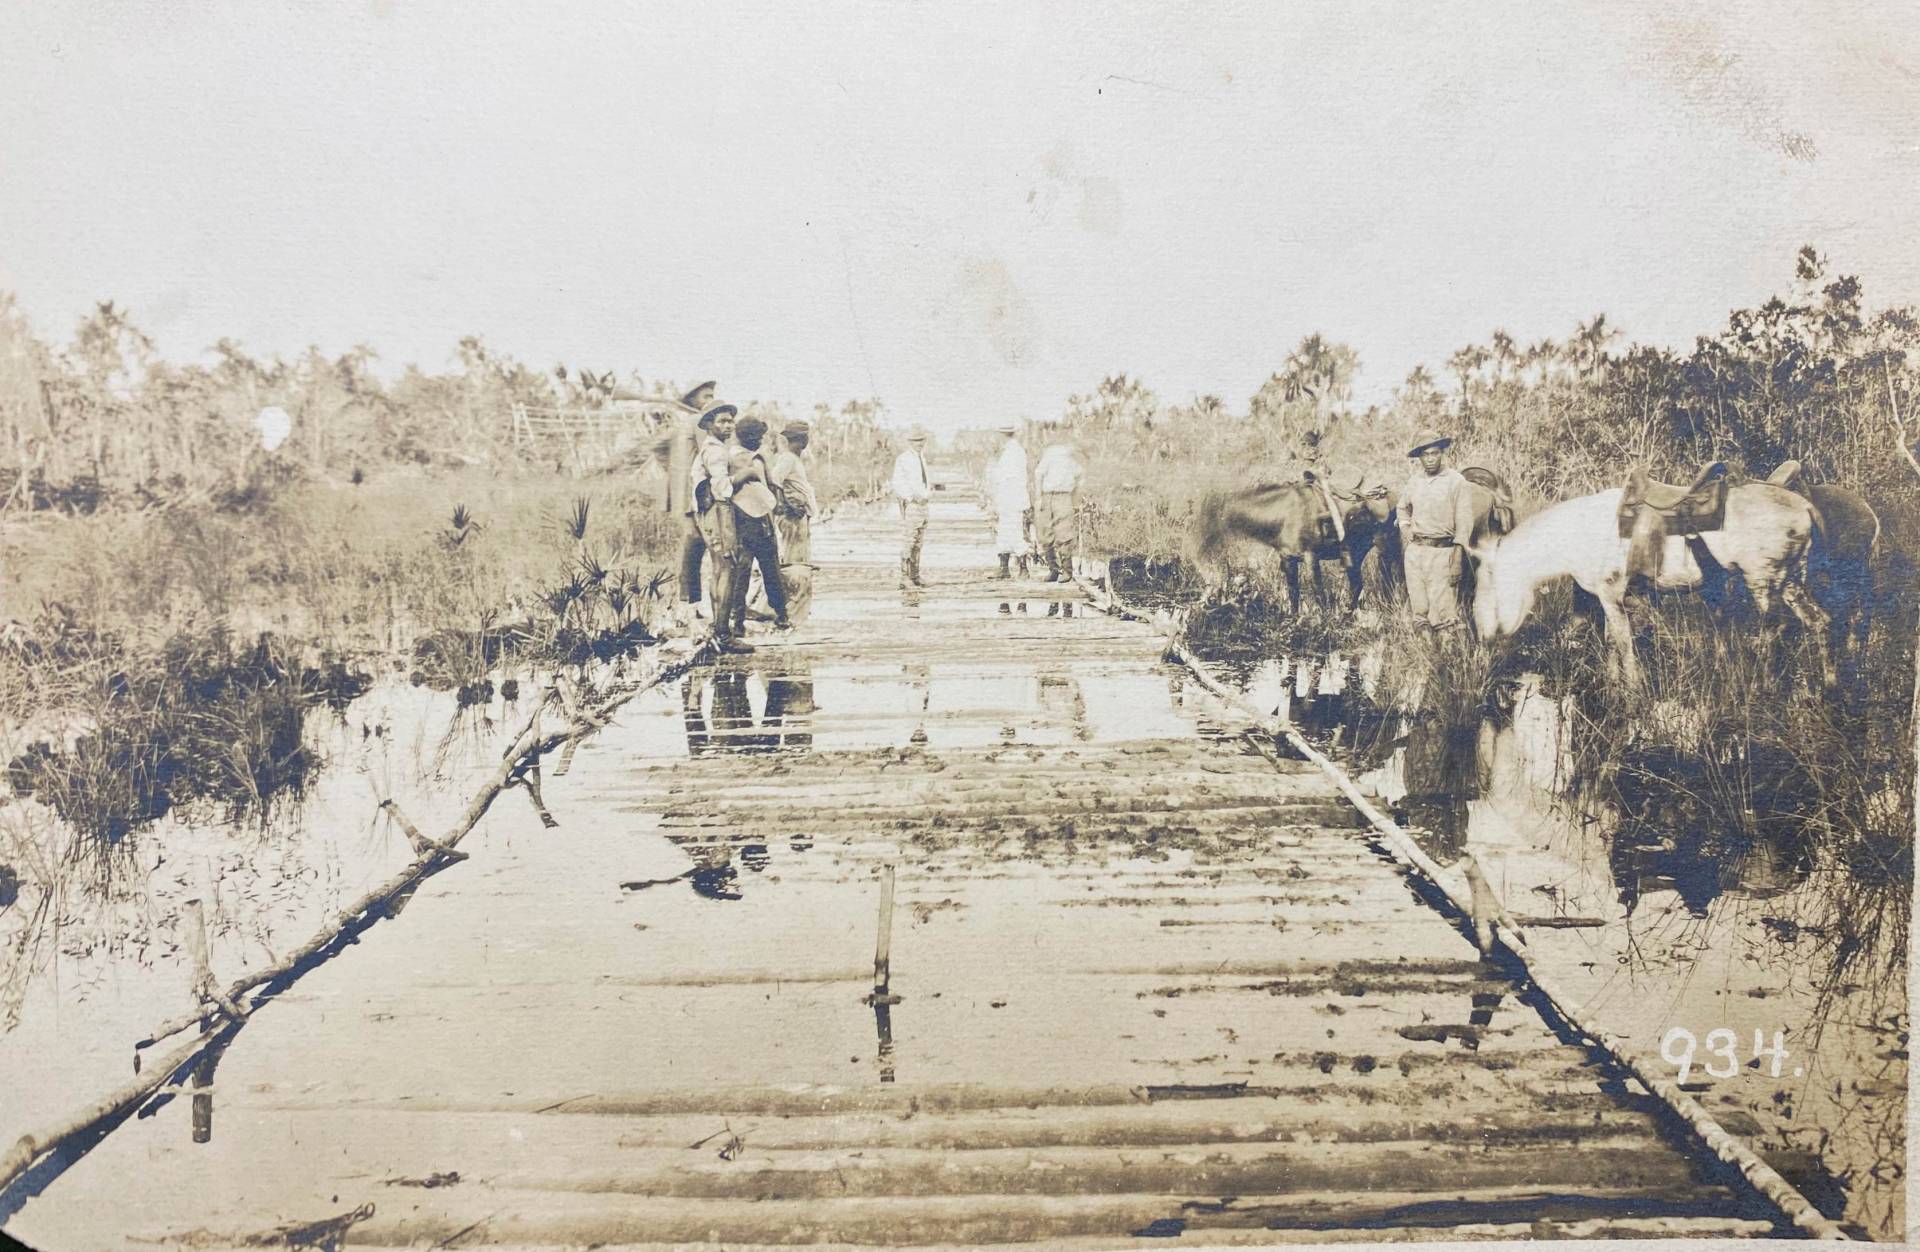 momocolor image of workers constructing one portion of a railway